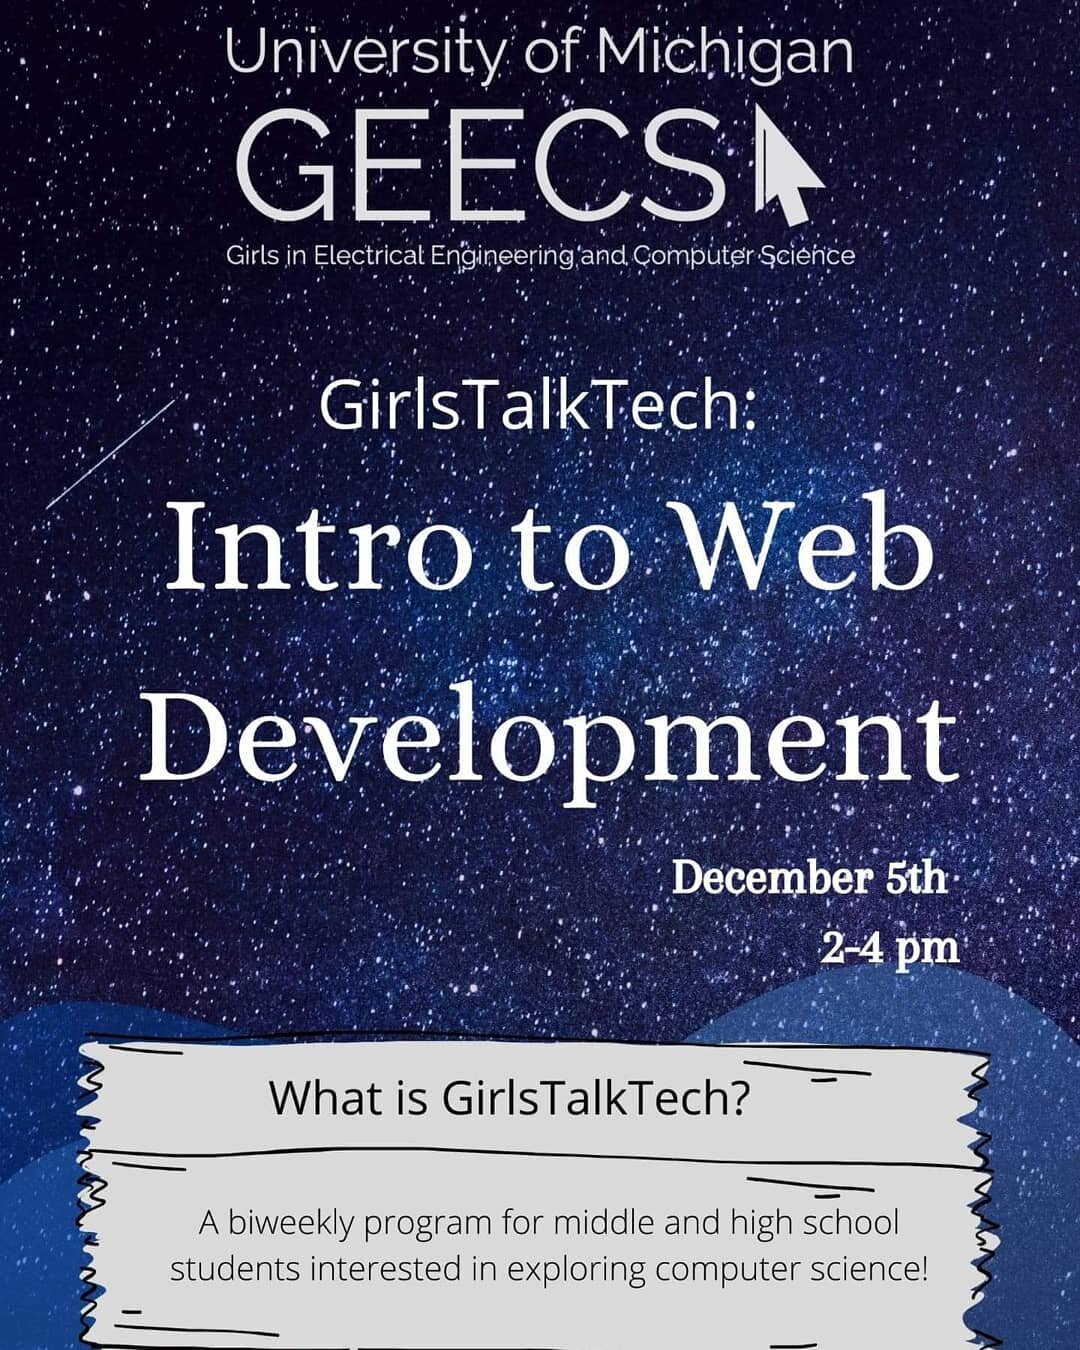 We're excited to see you all on December 5th to learn about web development!